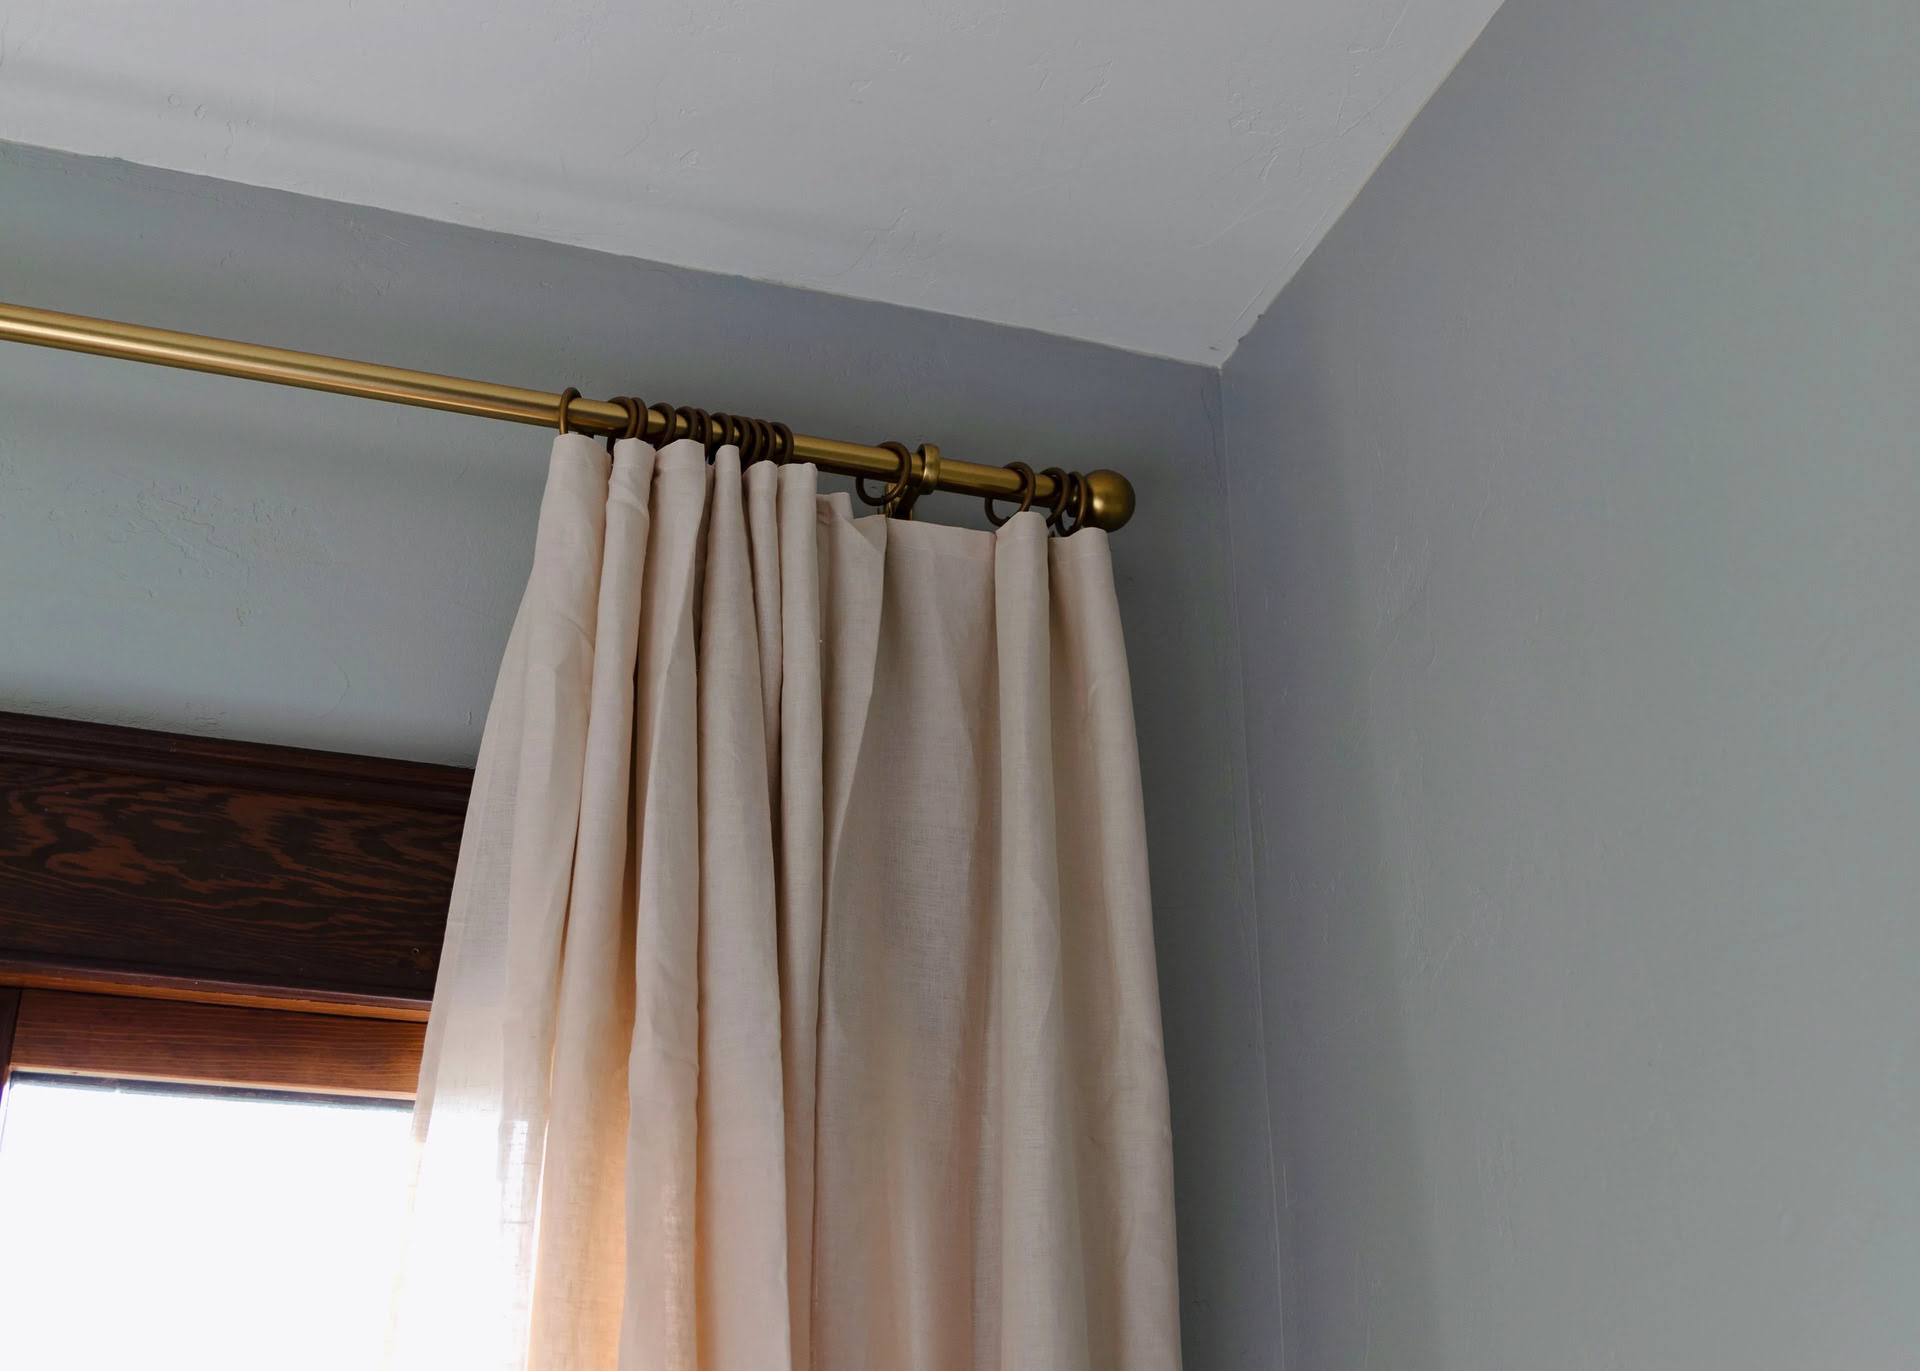 How To Make Curtains From Sheets